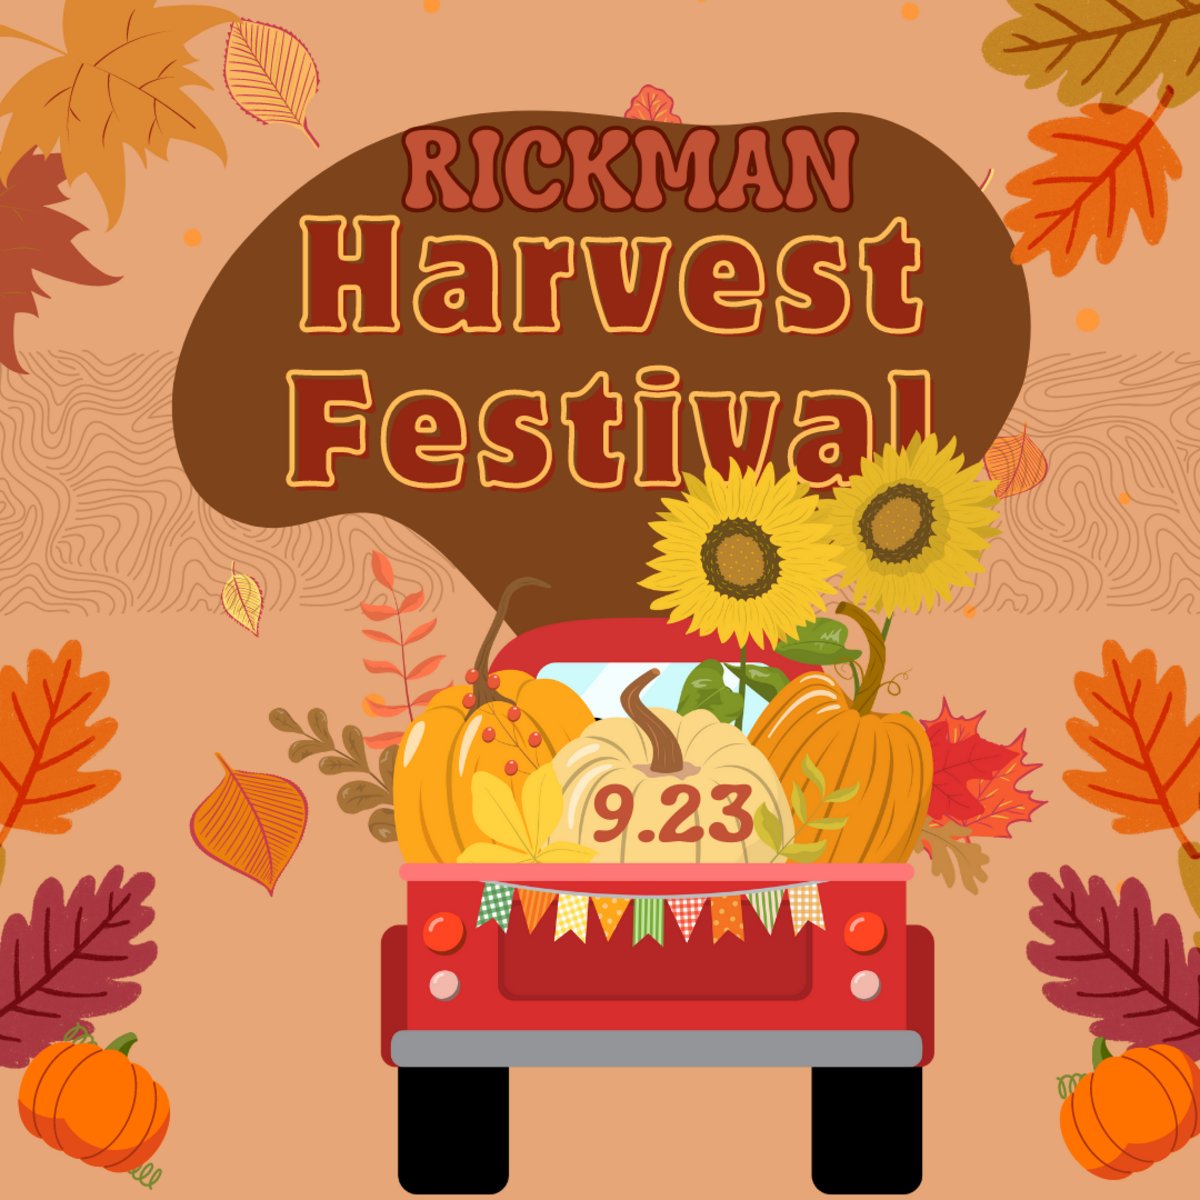 Mark your calendars for the #RickmanHarvestFestival on Sept. 23rd! It's an excellent way for families to have fun with #craftvendors, a #pettingzoo, #livemusic, and a #KidsZone. This is the best way to celebrate the start of fall! For more details, visit bit.ly/45HGBd3.